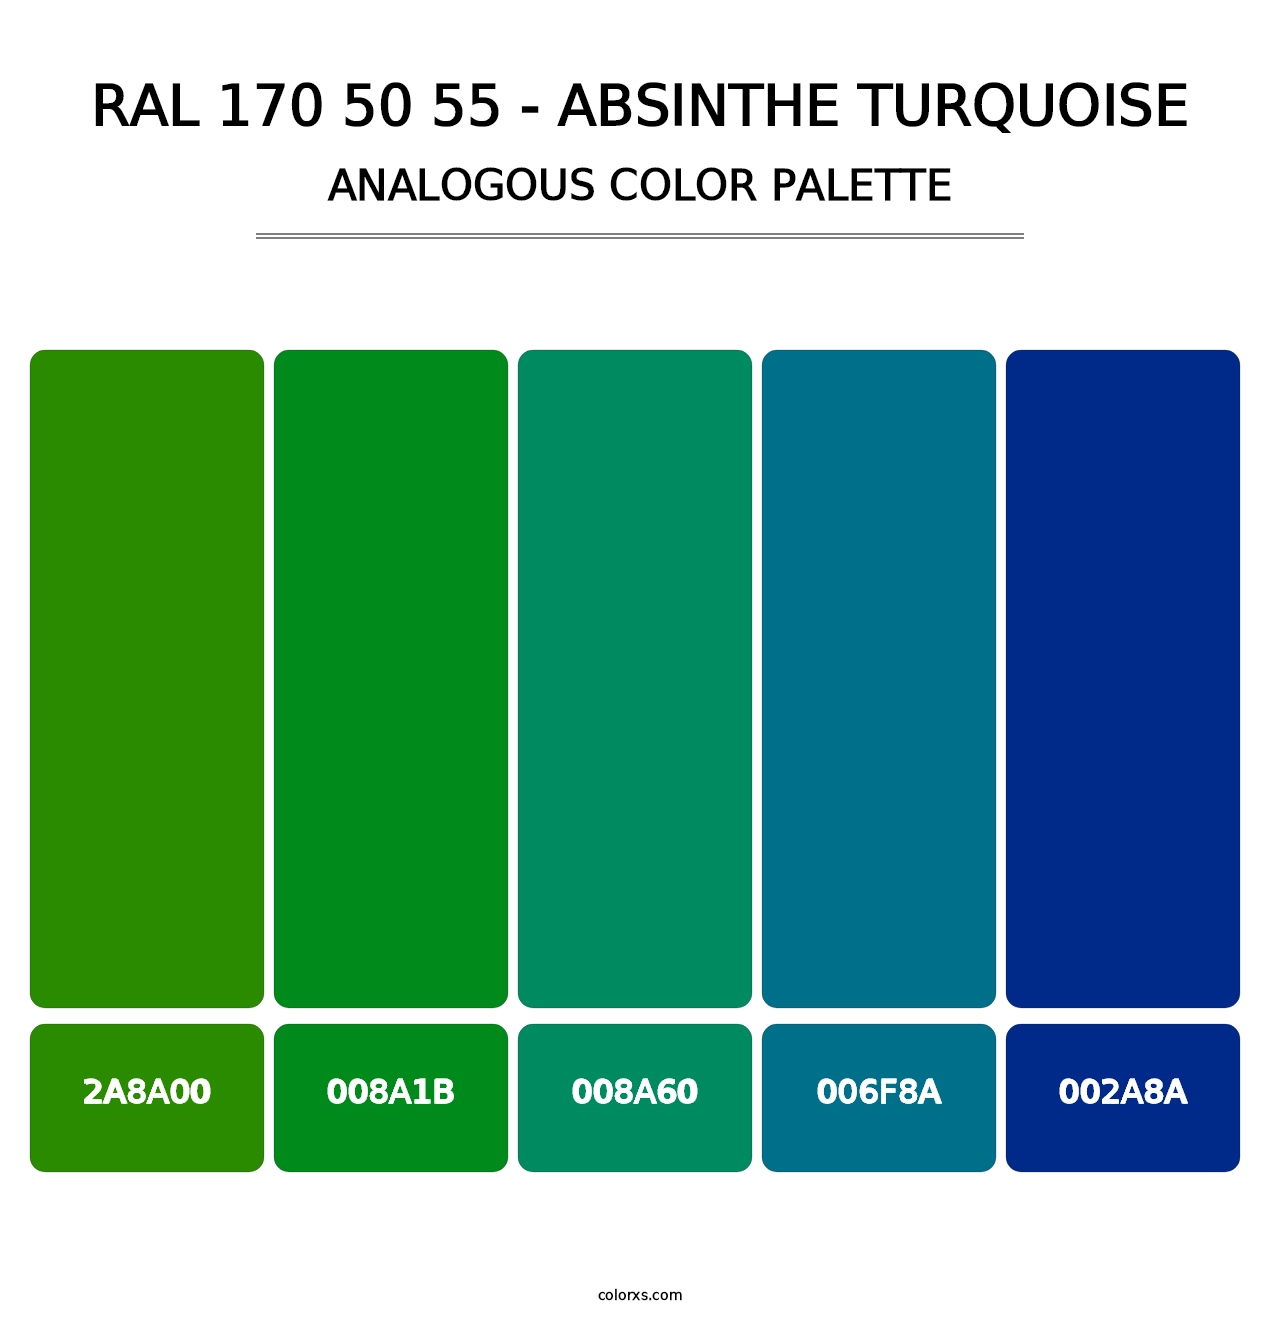 RAL 170 50 55 - Absinthe Turquoise - Analogous Color Palette